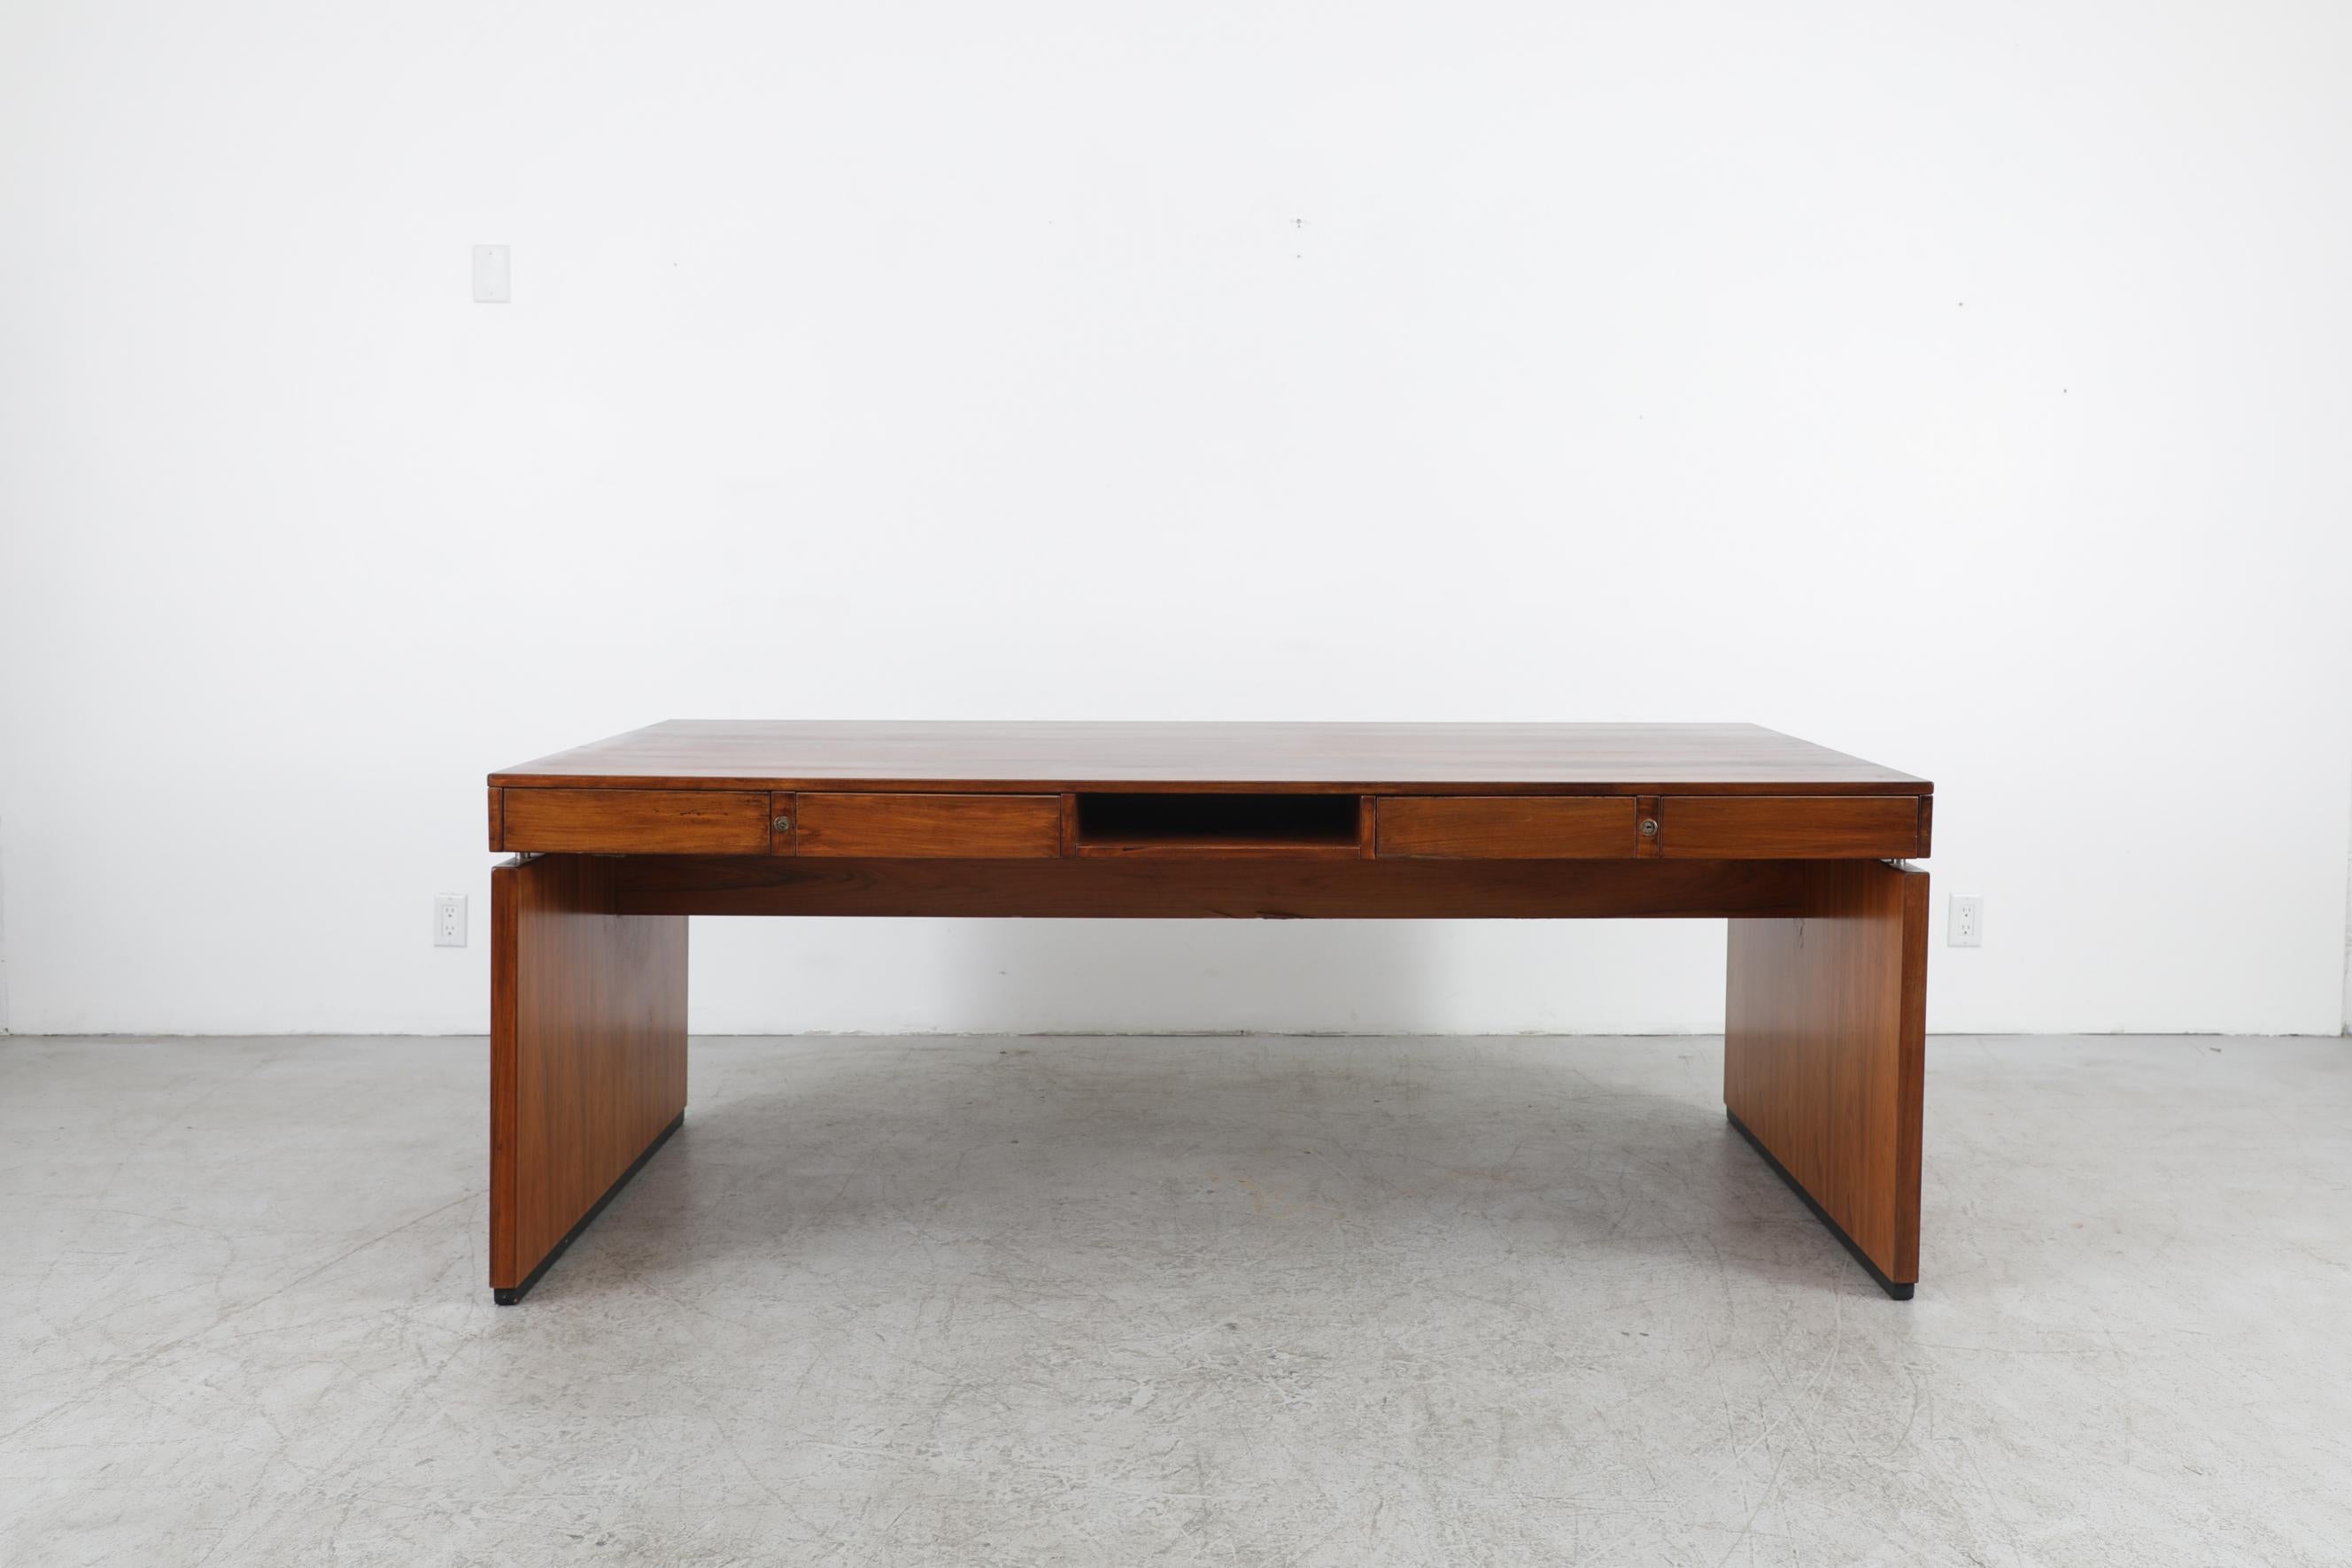 Finn Juhl style rosewood executive desk with brushed steel details and 4 drawers. Striking design with waterfall style legs.
In original condition with visible wear including some scratches and chips to the middle base. The wear is consistent with